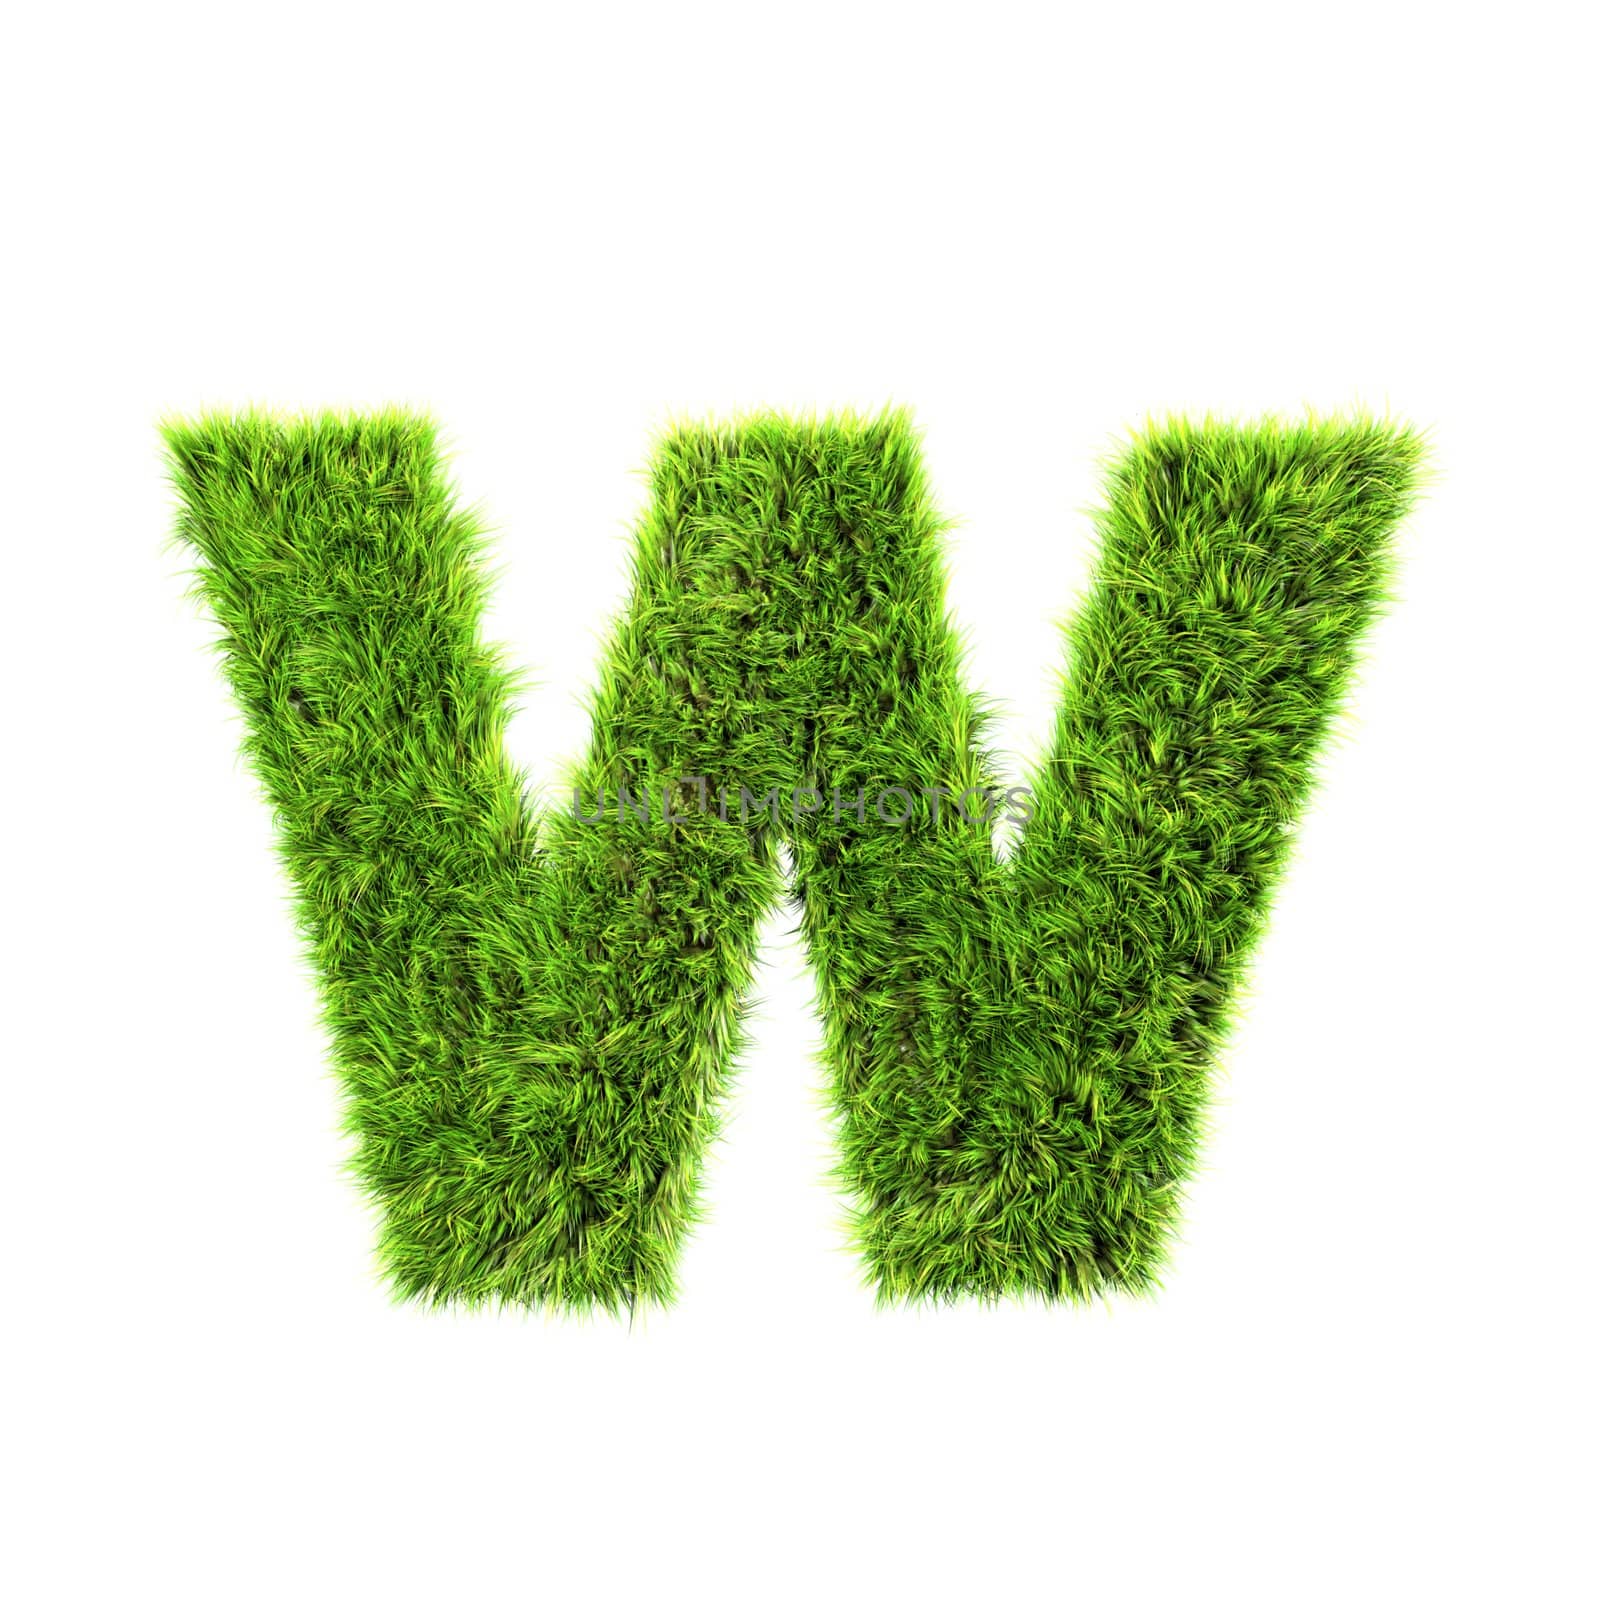 3d grass letter isolated on white background - w by chrisroll